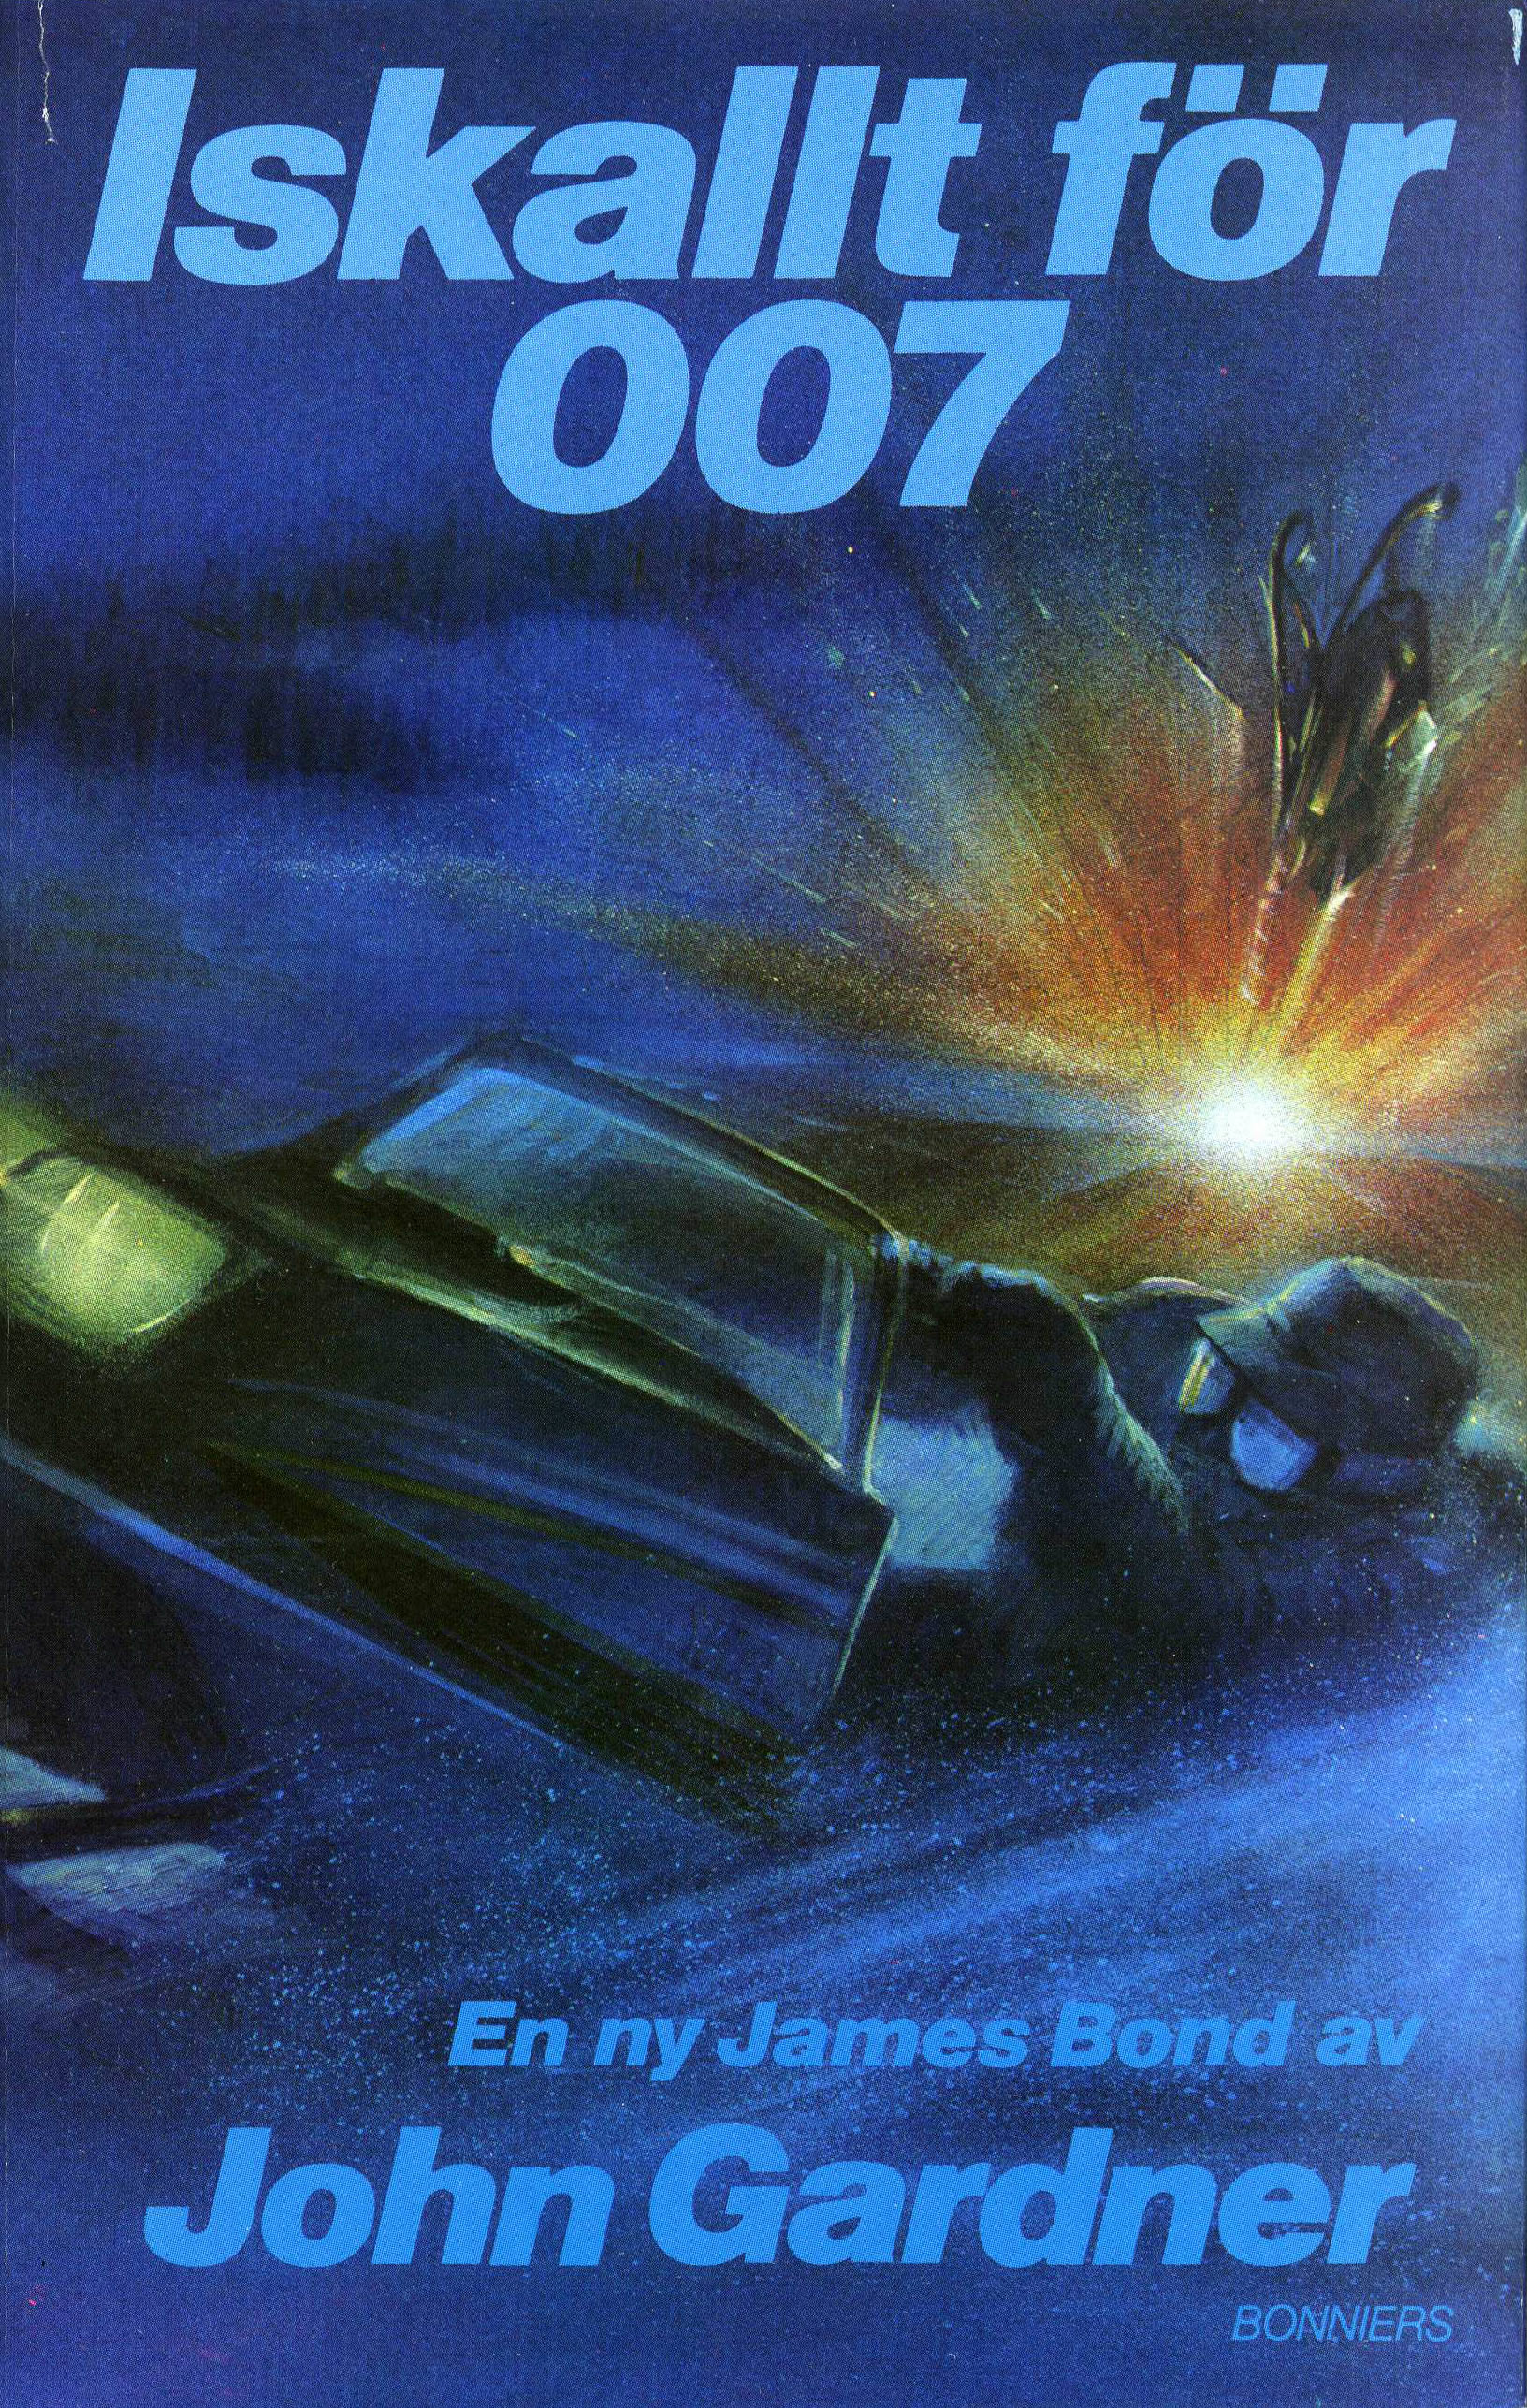 First UK edition of Icebreaker (1983)